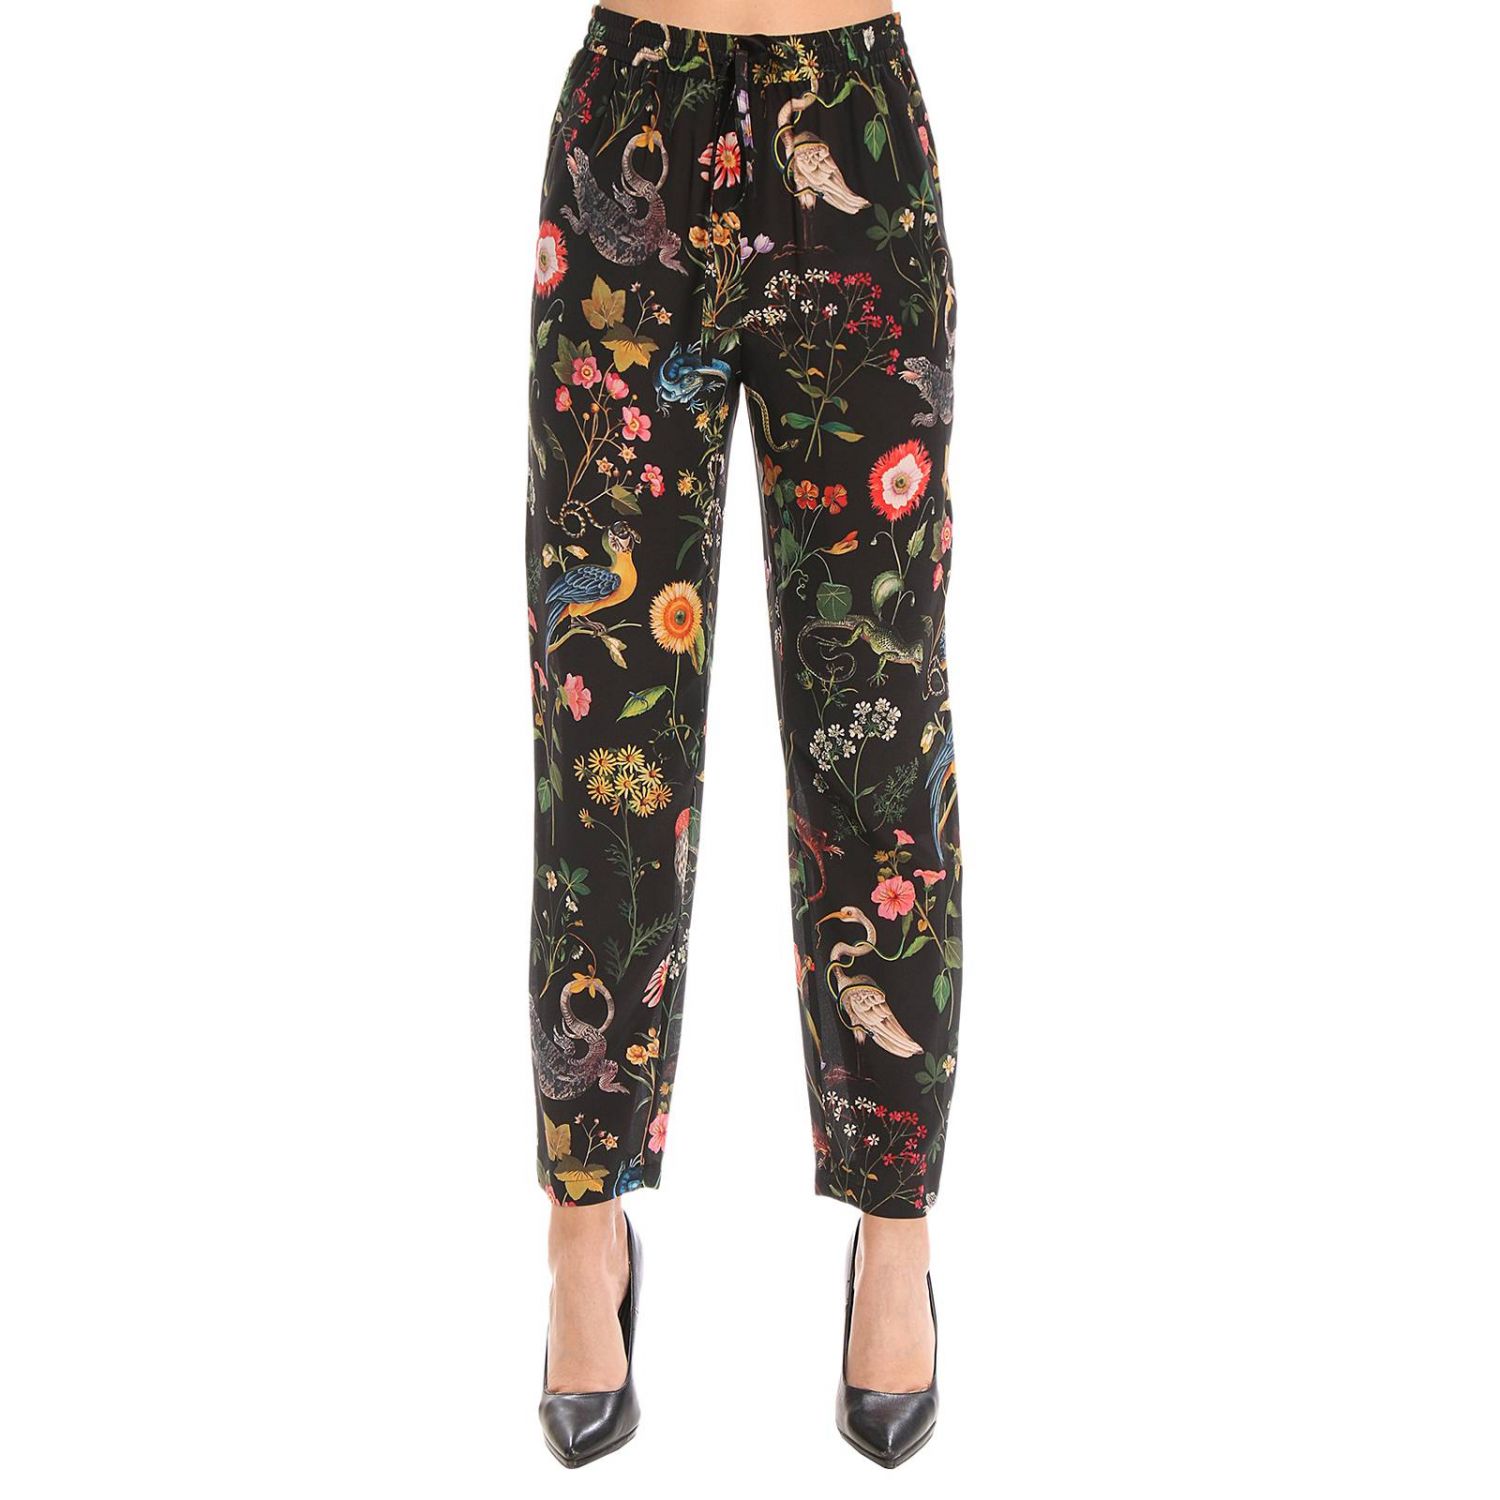 Red Valentino Outlet: Pants women | Pants Red Valentino Women Black